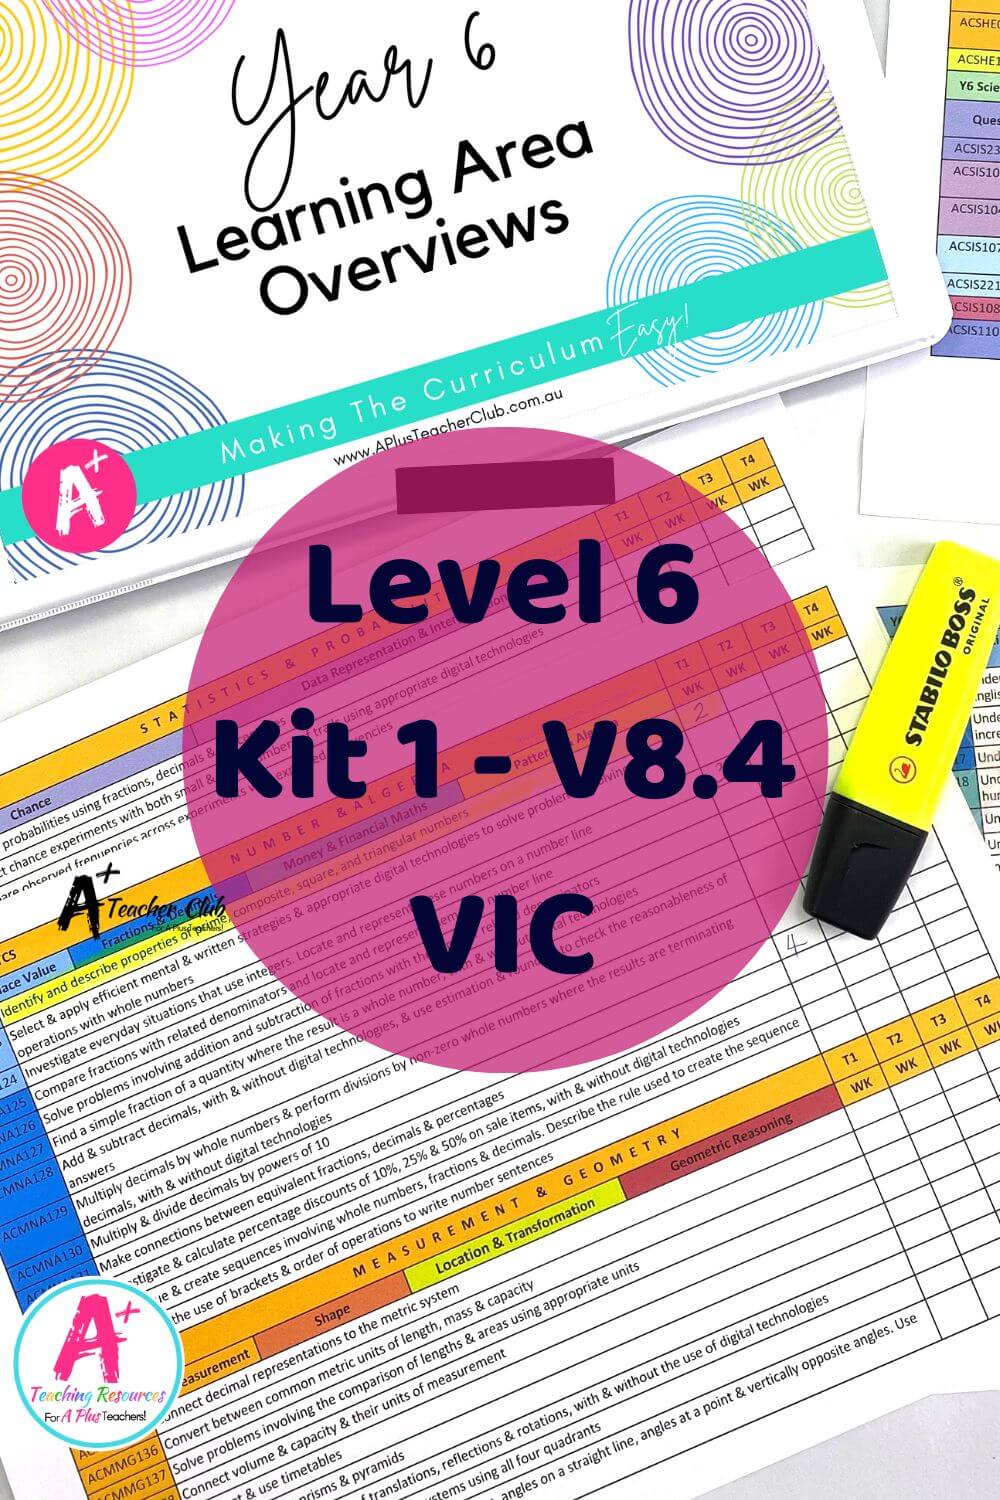 Level 6 Forward Planning Curriculum Overview VIC 8.4